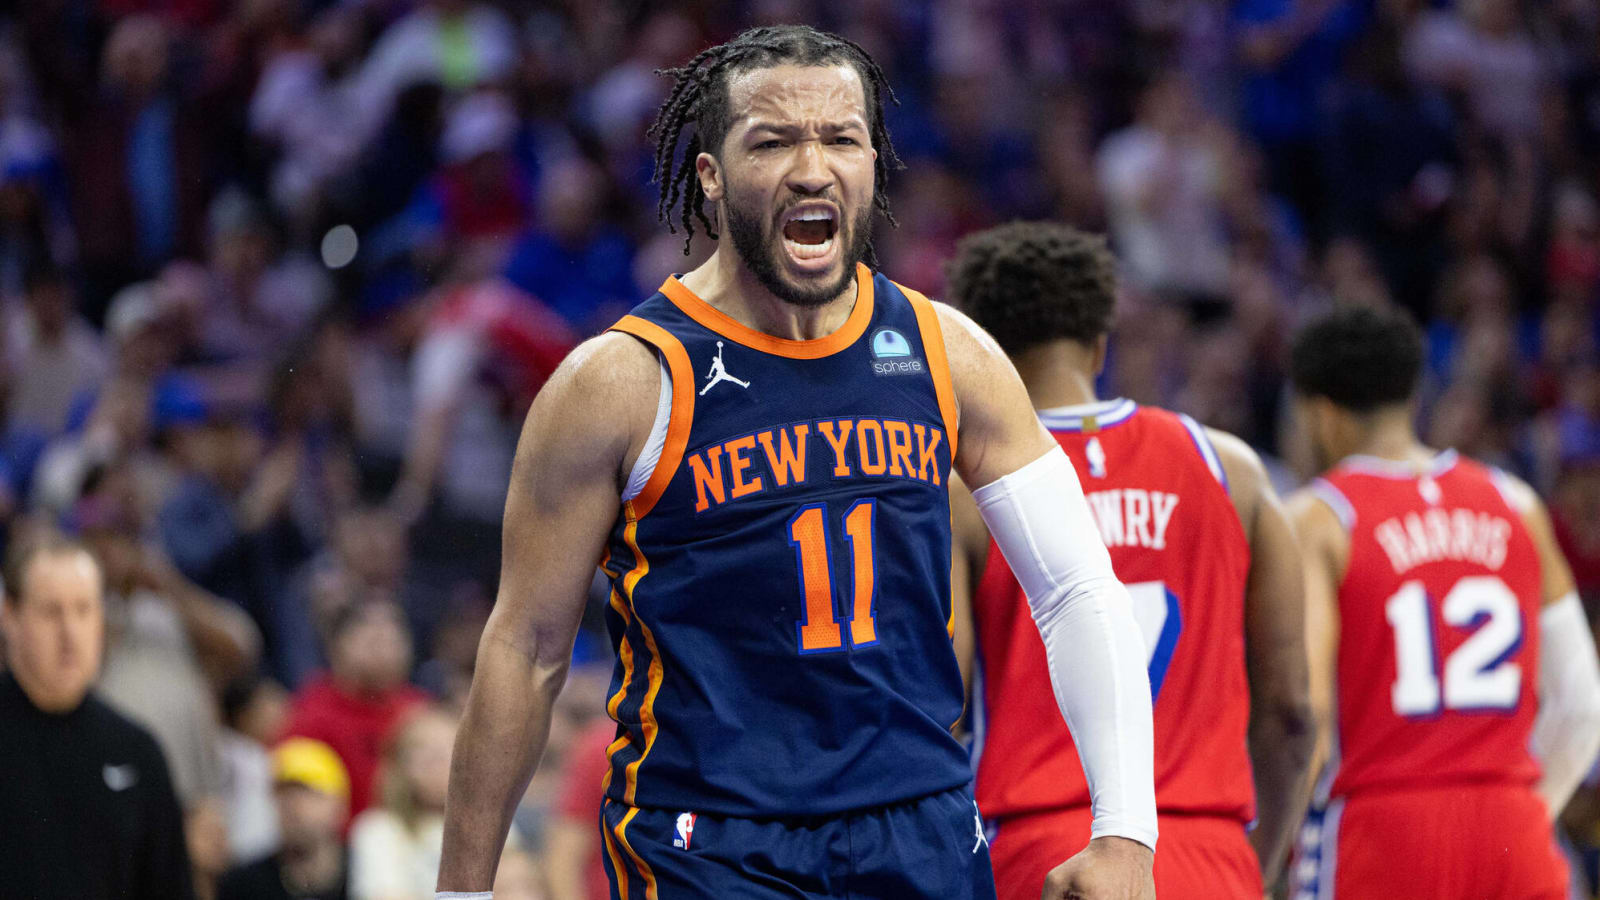 Jalen Brunson Breaks Incredible New York Knicks Record As He Leads Team to a Strong Game 4 Win